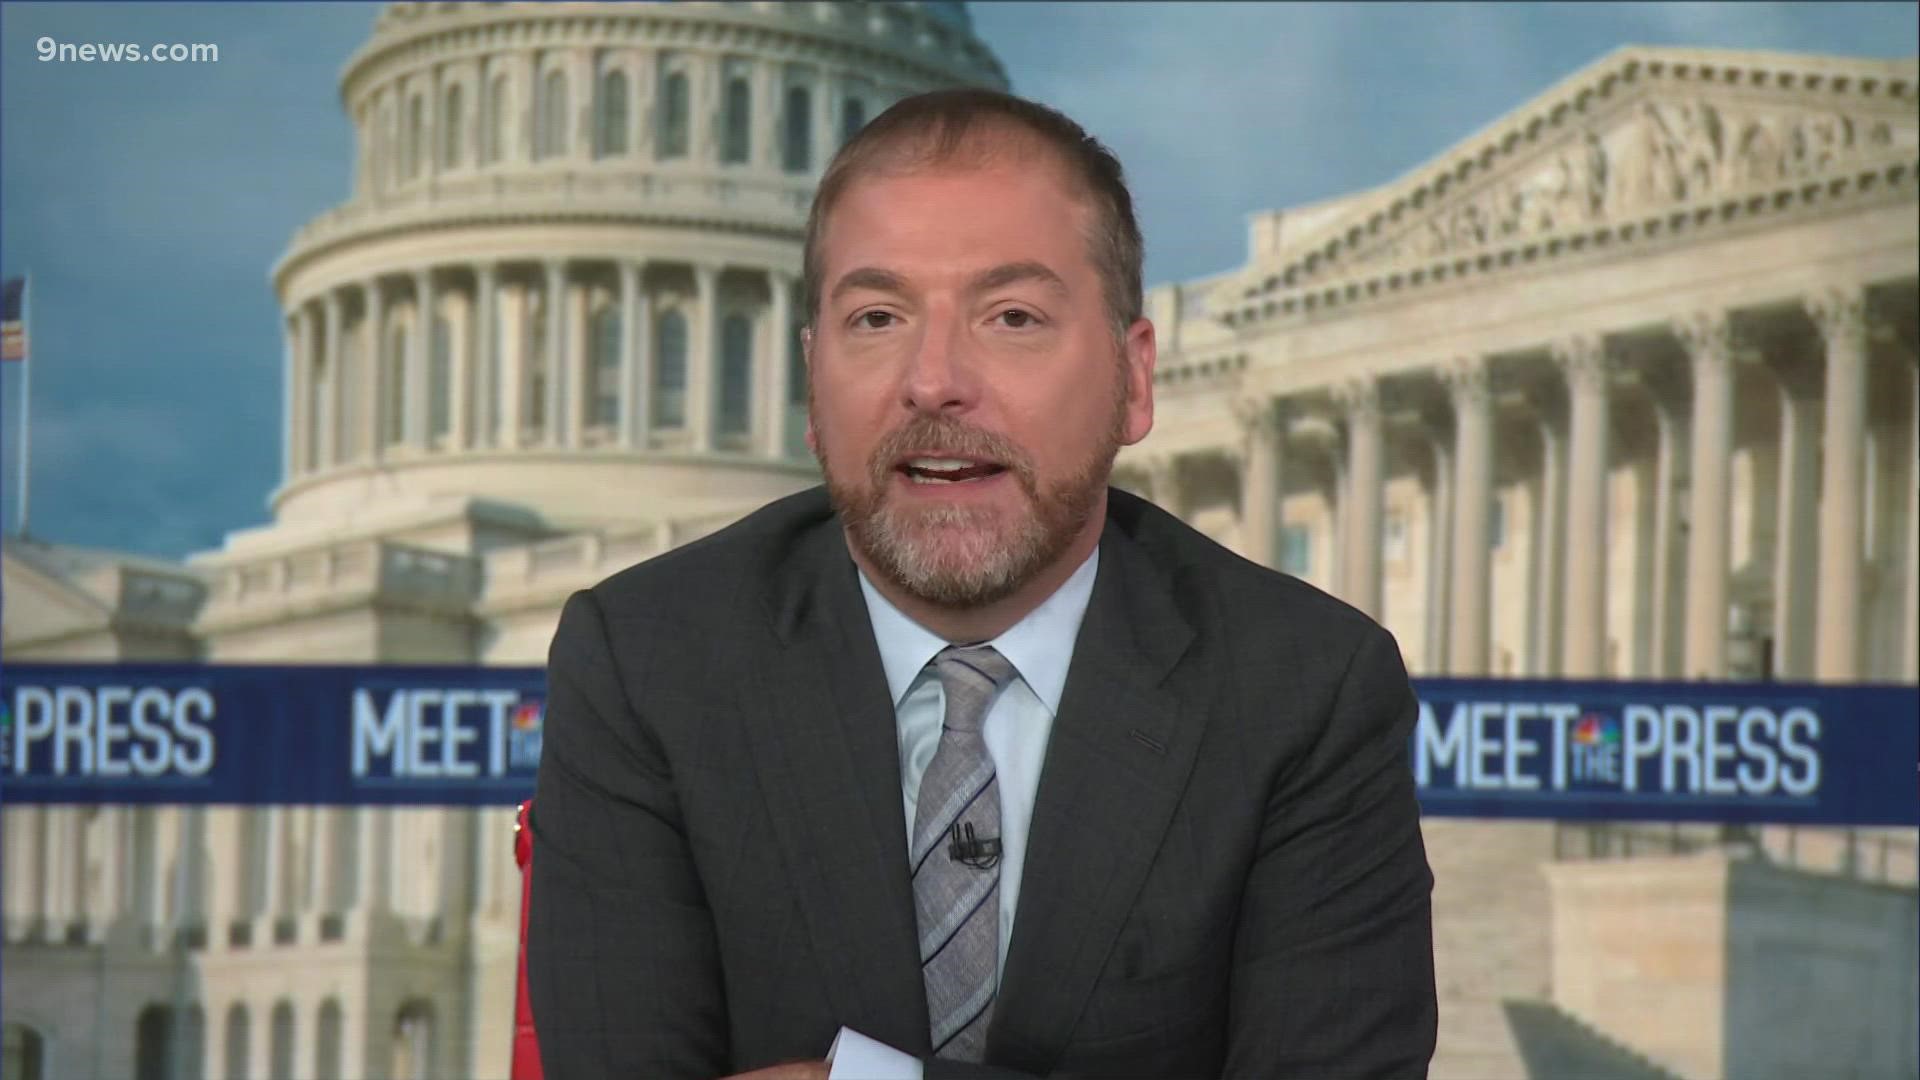 NBC's Chuck Todd talks about a vaccine mandate for large businesses, and what we've gotten right and wrong since 9/11.